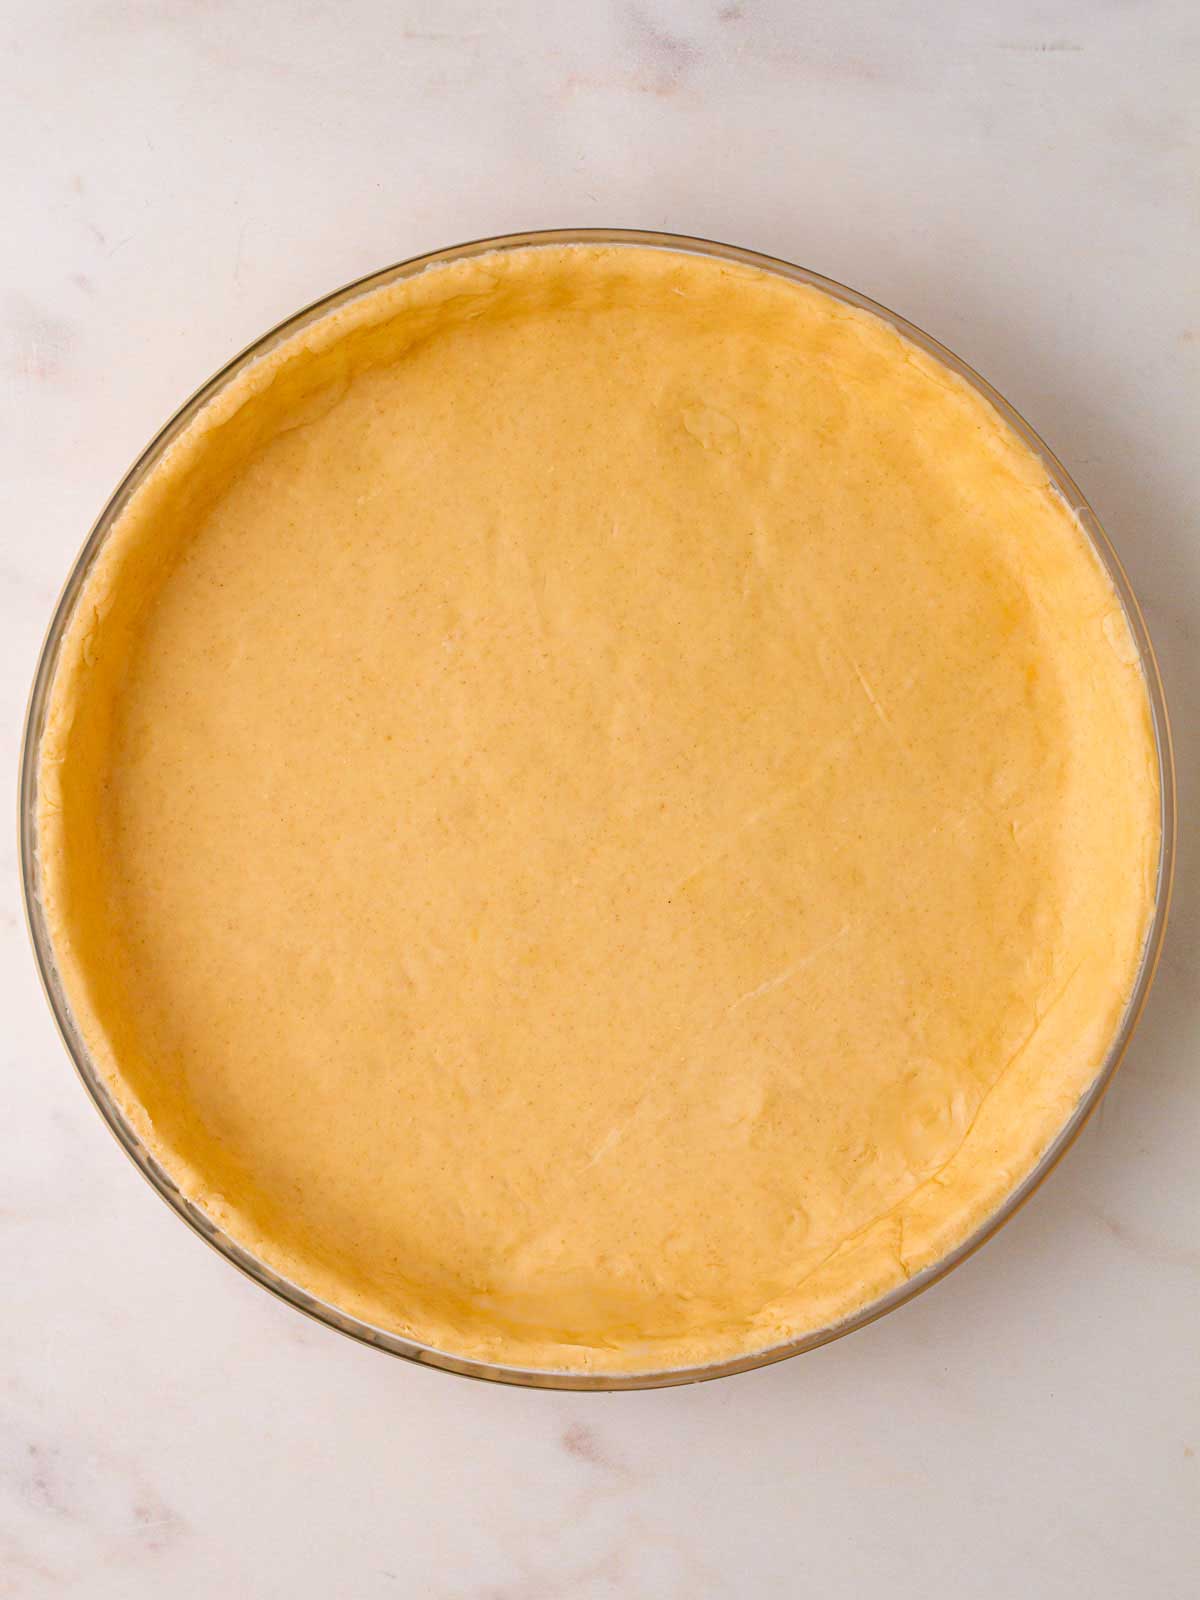 A plain pastry bottom in a round pie dish, ready to be filled with cherry pie filling.